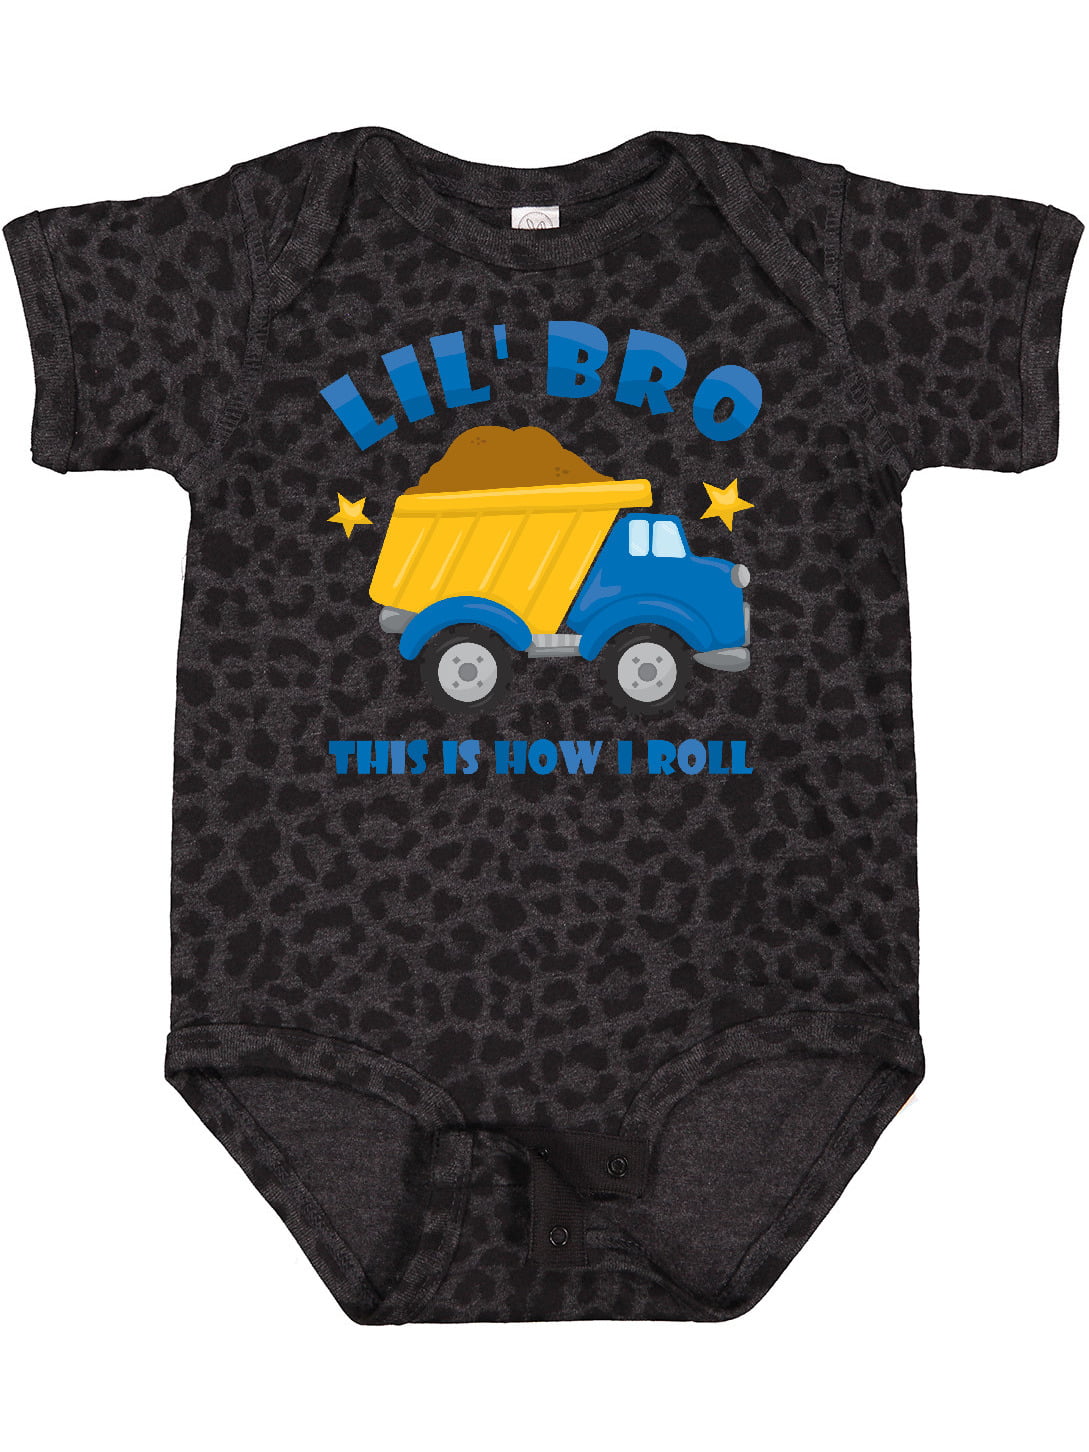 Infant Boys Baby Outfit Construction Dump Truck Long Sleeve Shirt & Overall Set